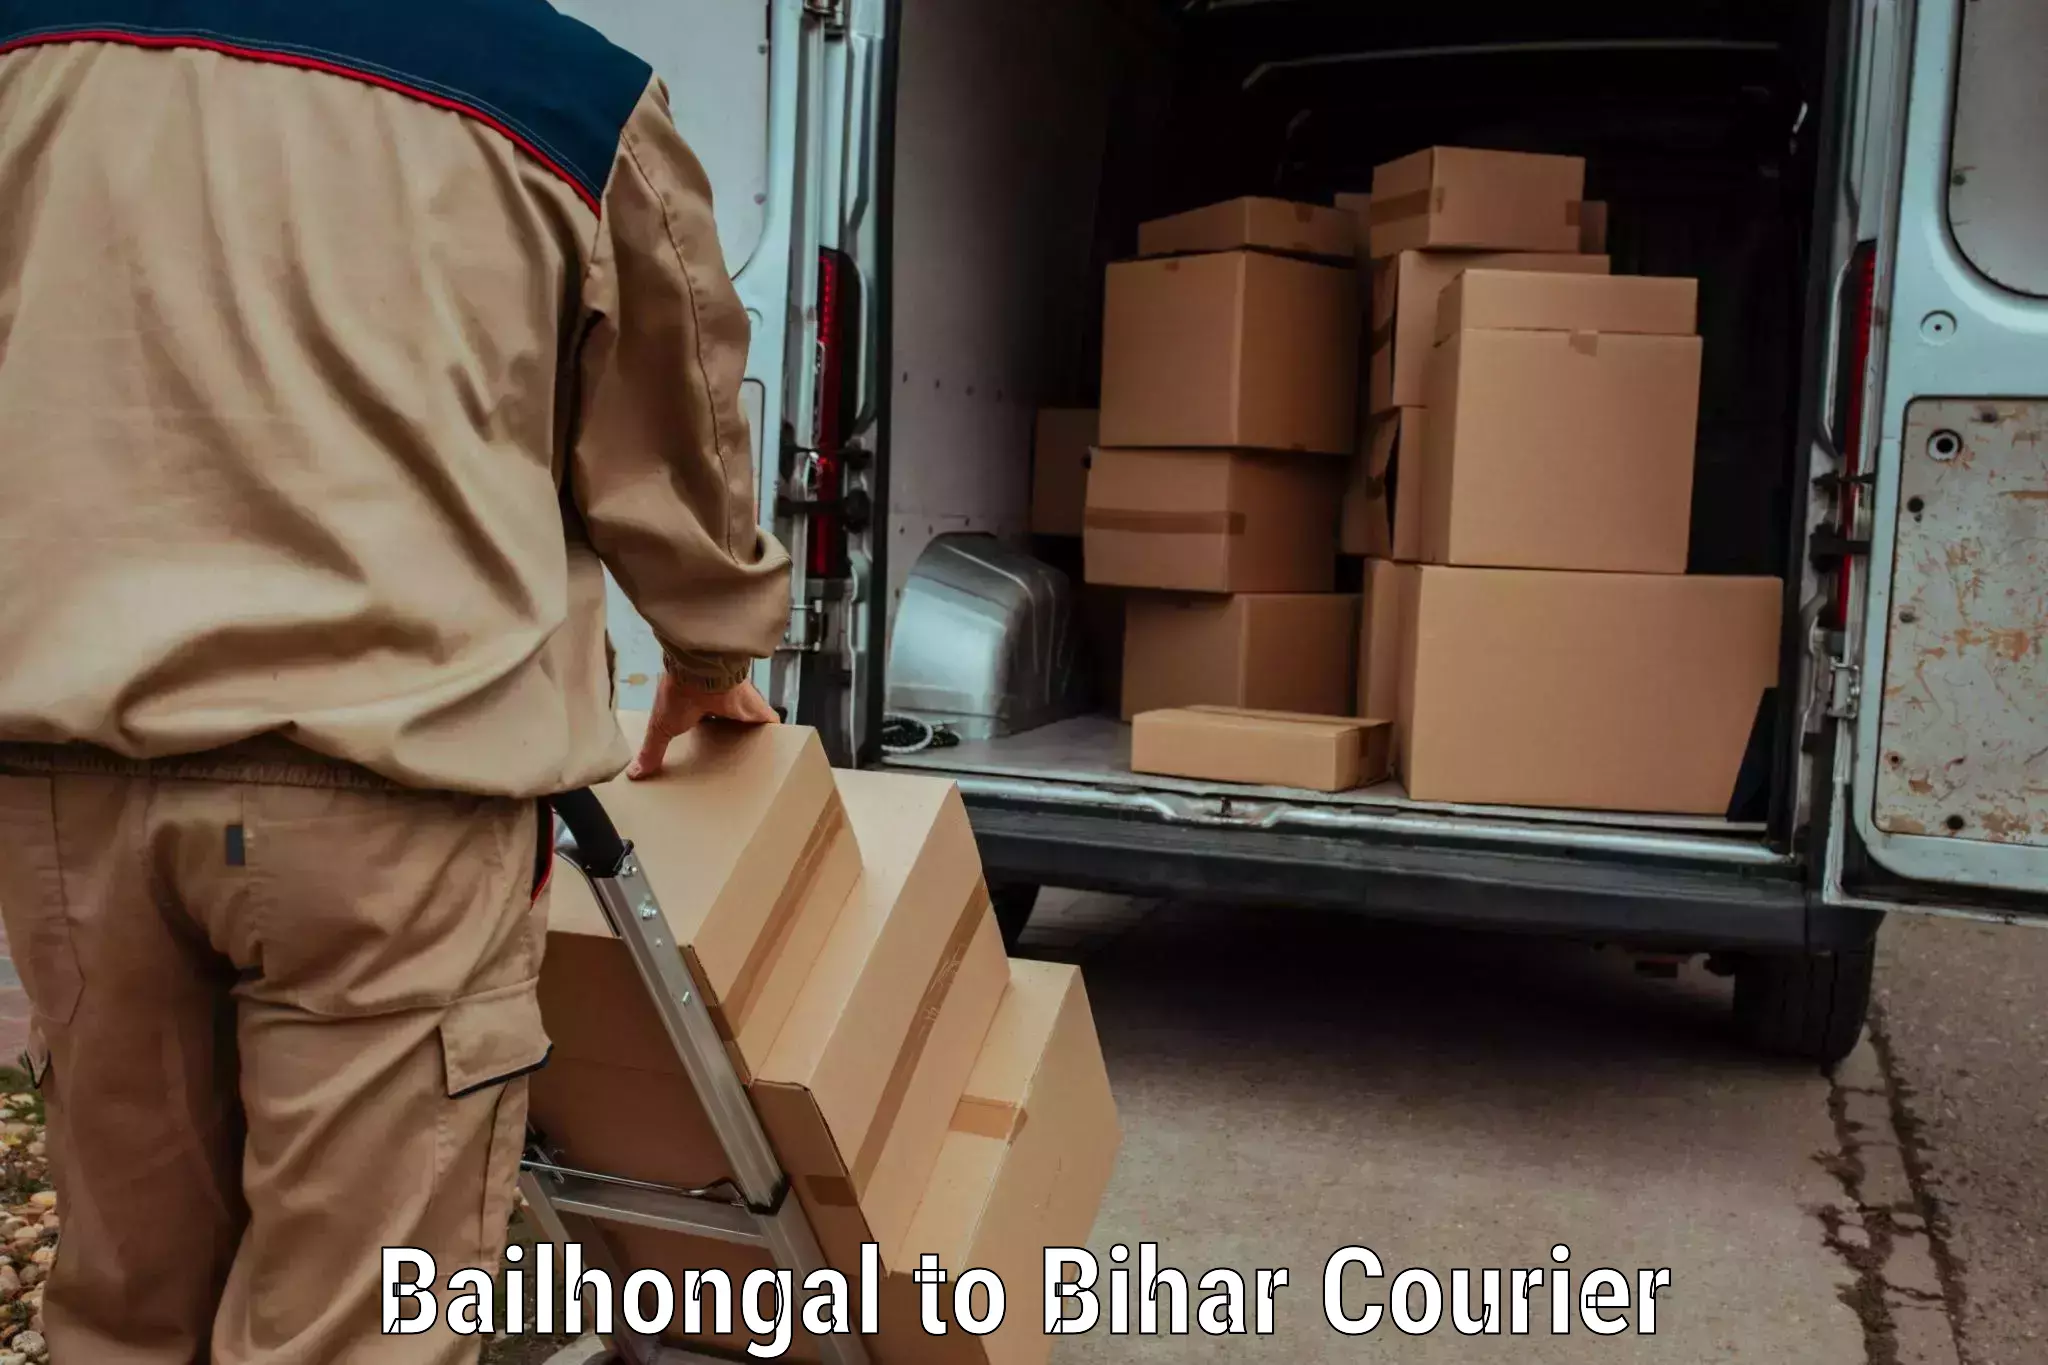 Next-generation courier services Bailhongal to Biraul